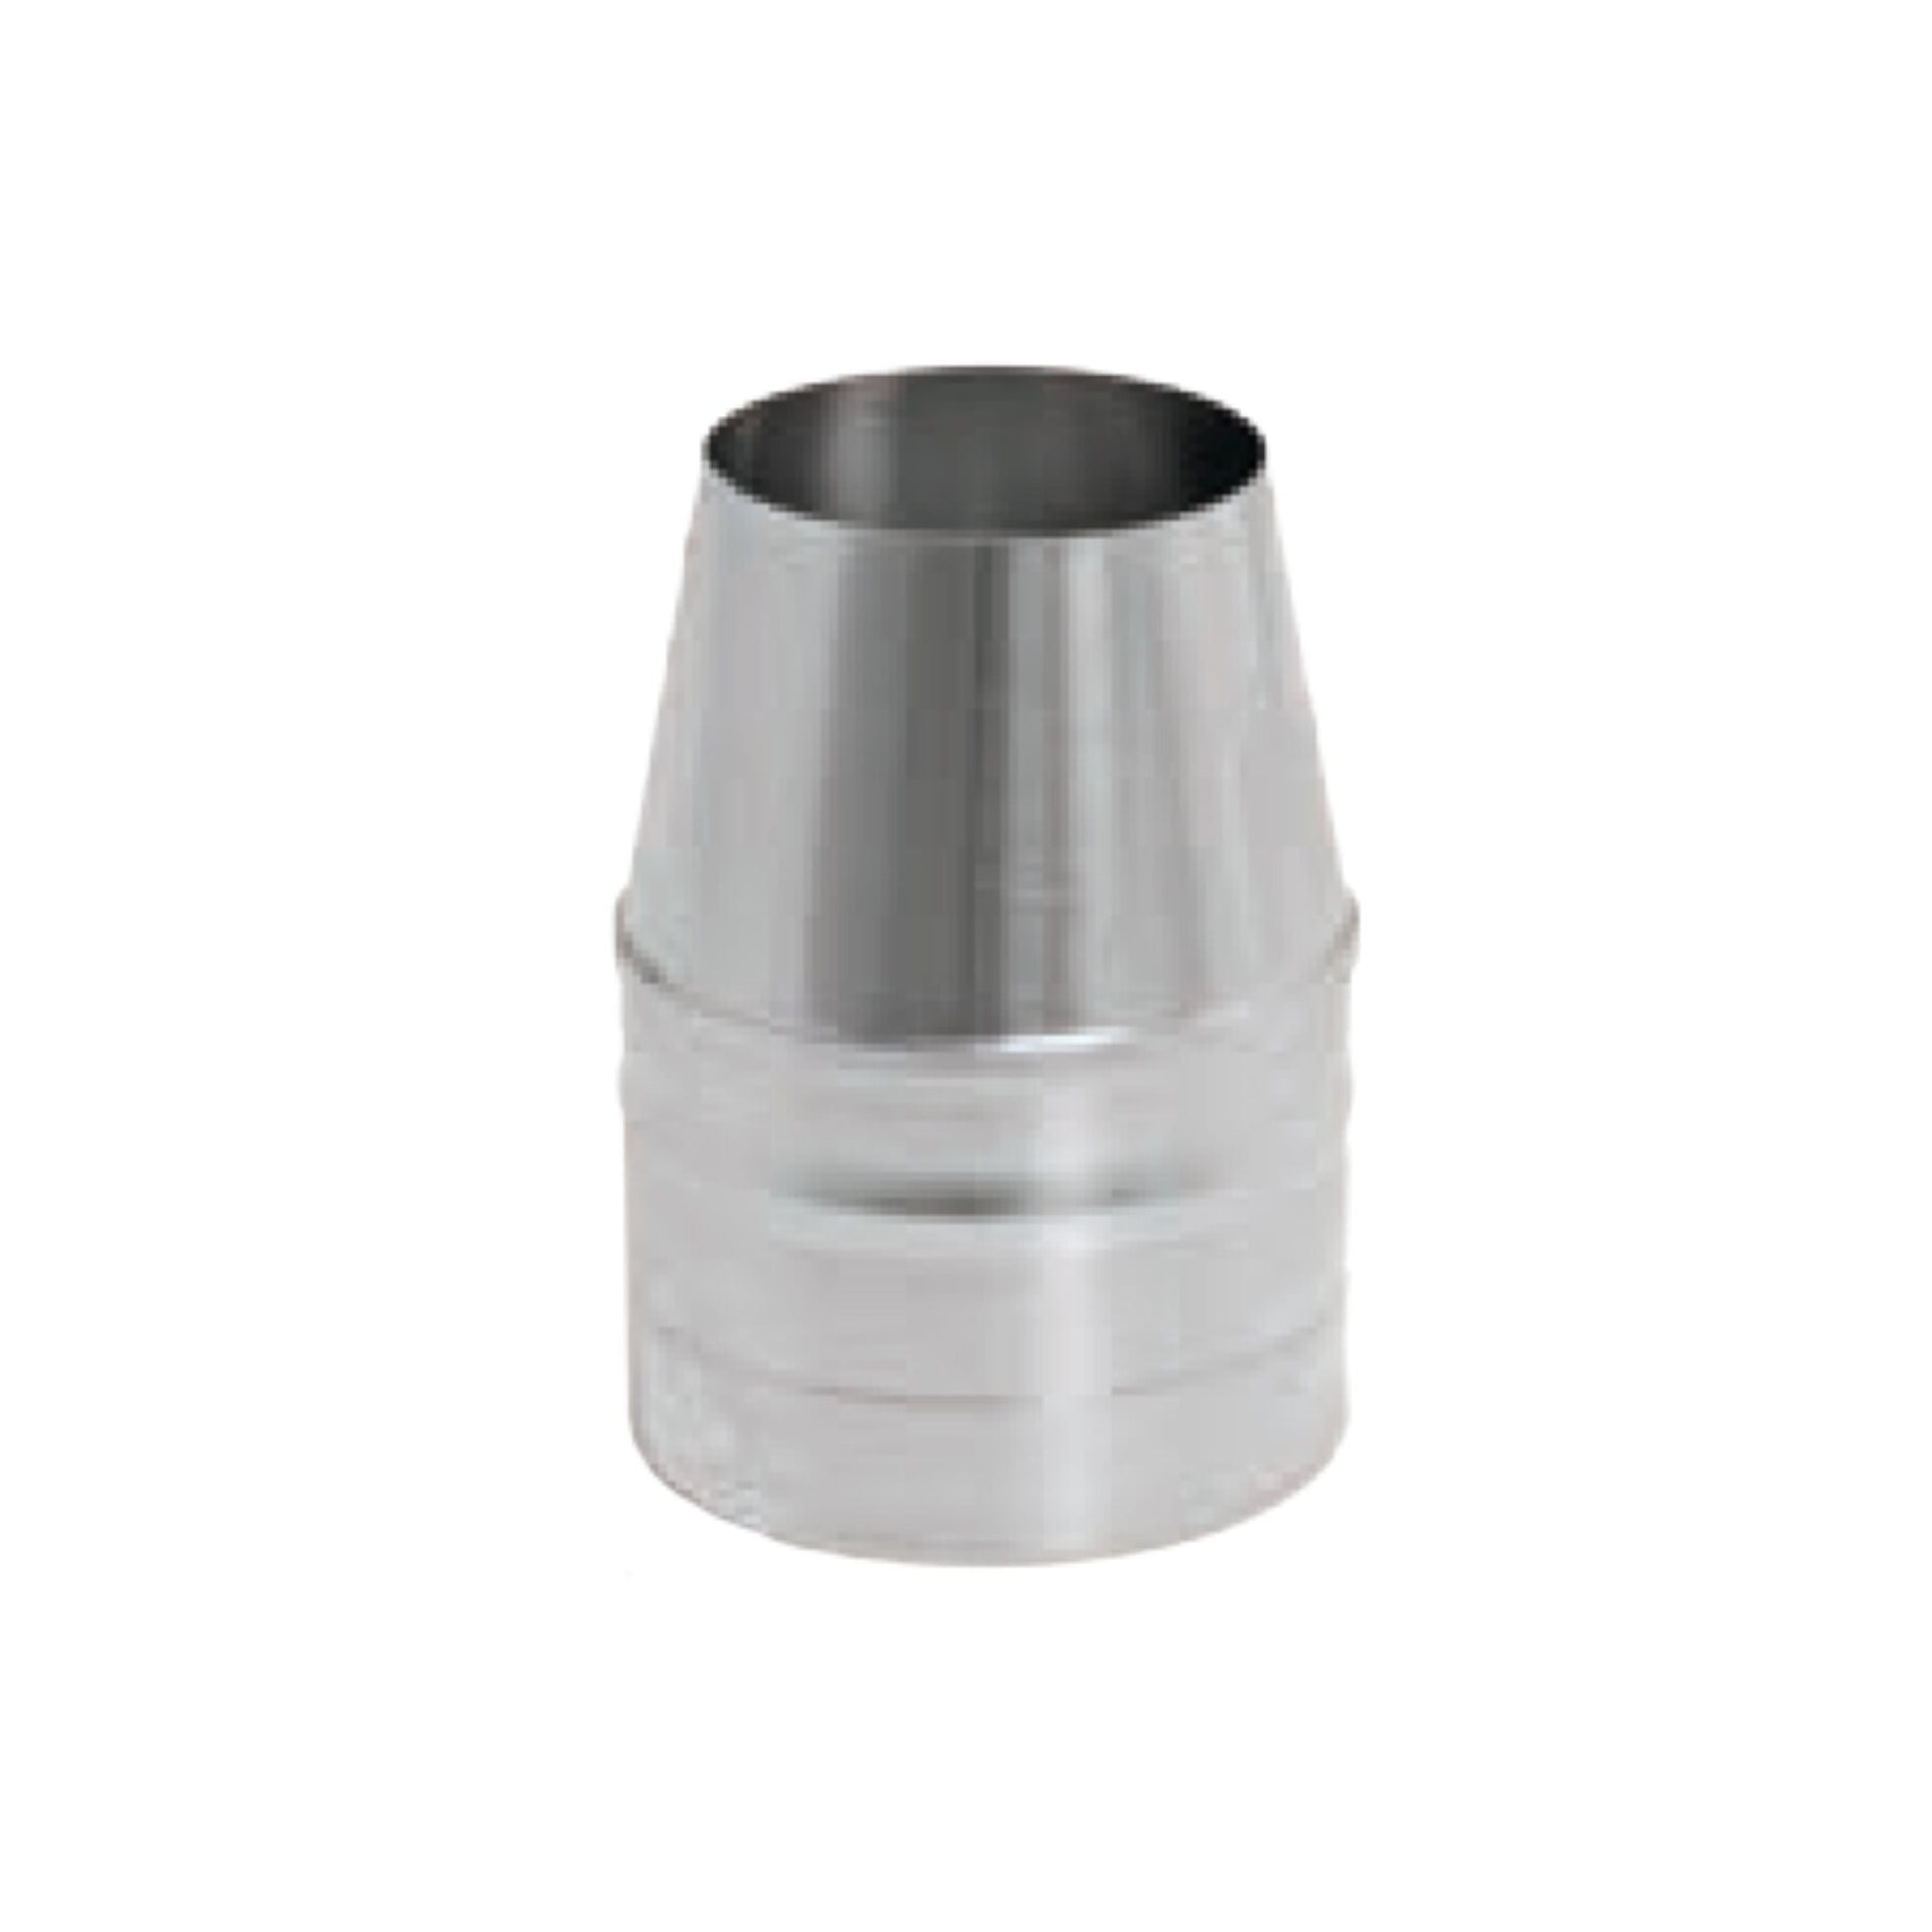 DuraVent FasNSeal 16" x 14" 29-4C Stainless Steel Termination Cone